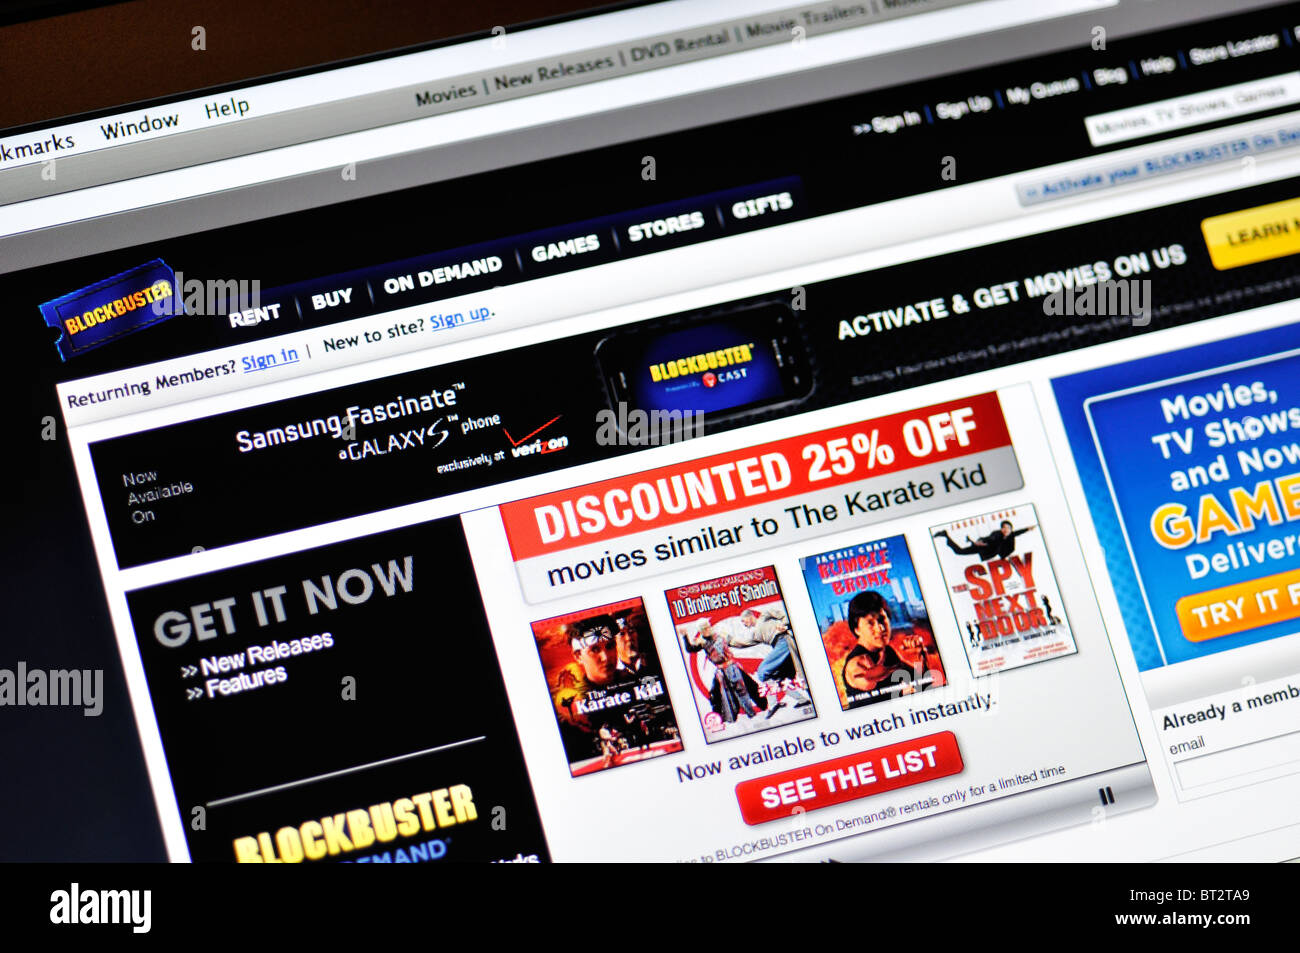 Blockbuster website - online movie and video game rental Stock Photo - Alamy